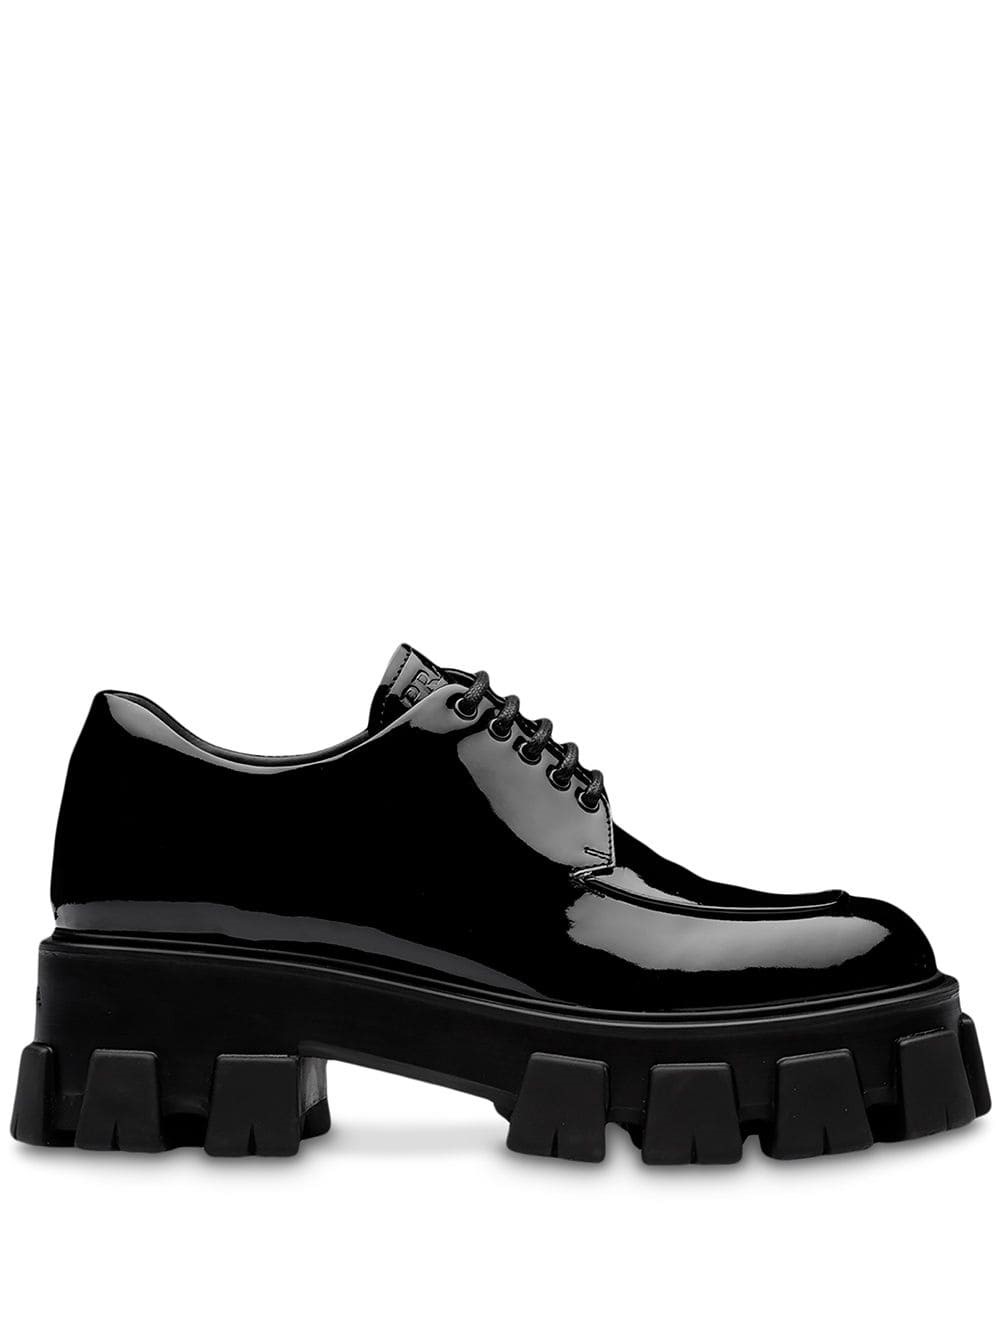 prada LACE UP SHOES available on 